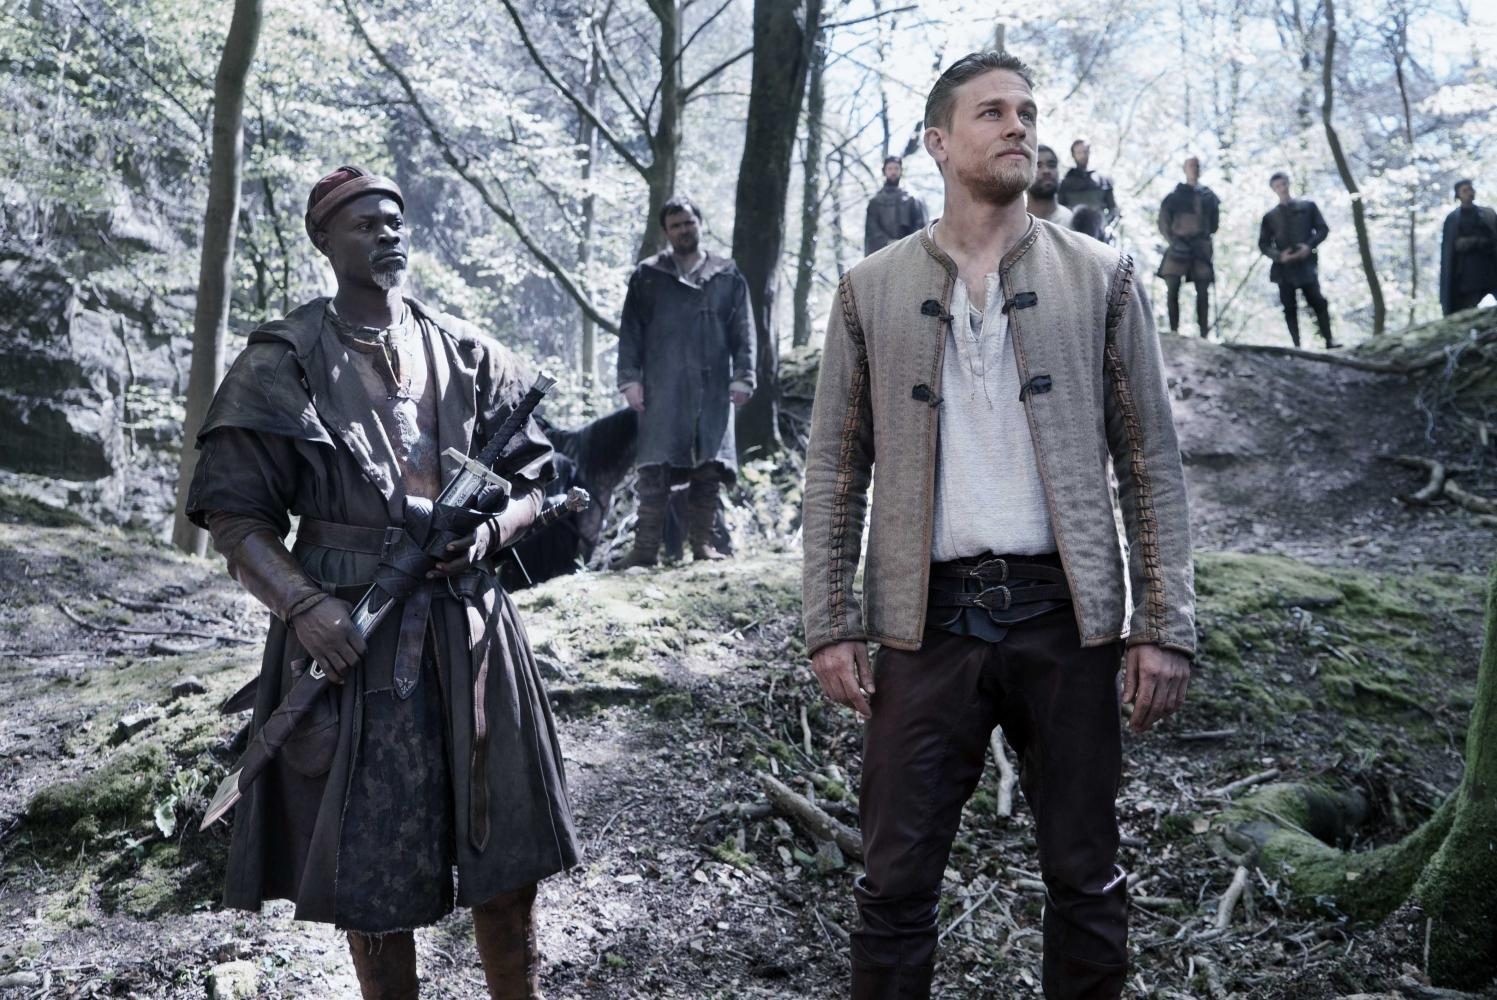 Djimon Hounsou (left) and Charlie Hunnam (right) on the set of King Arthur: Legend of the Sword